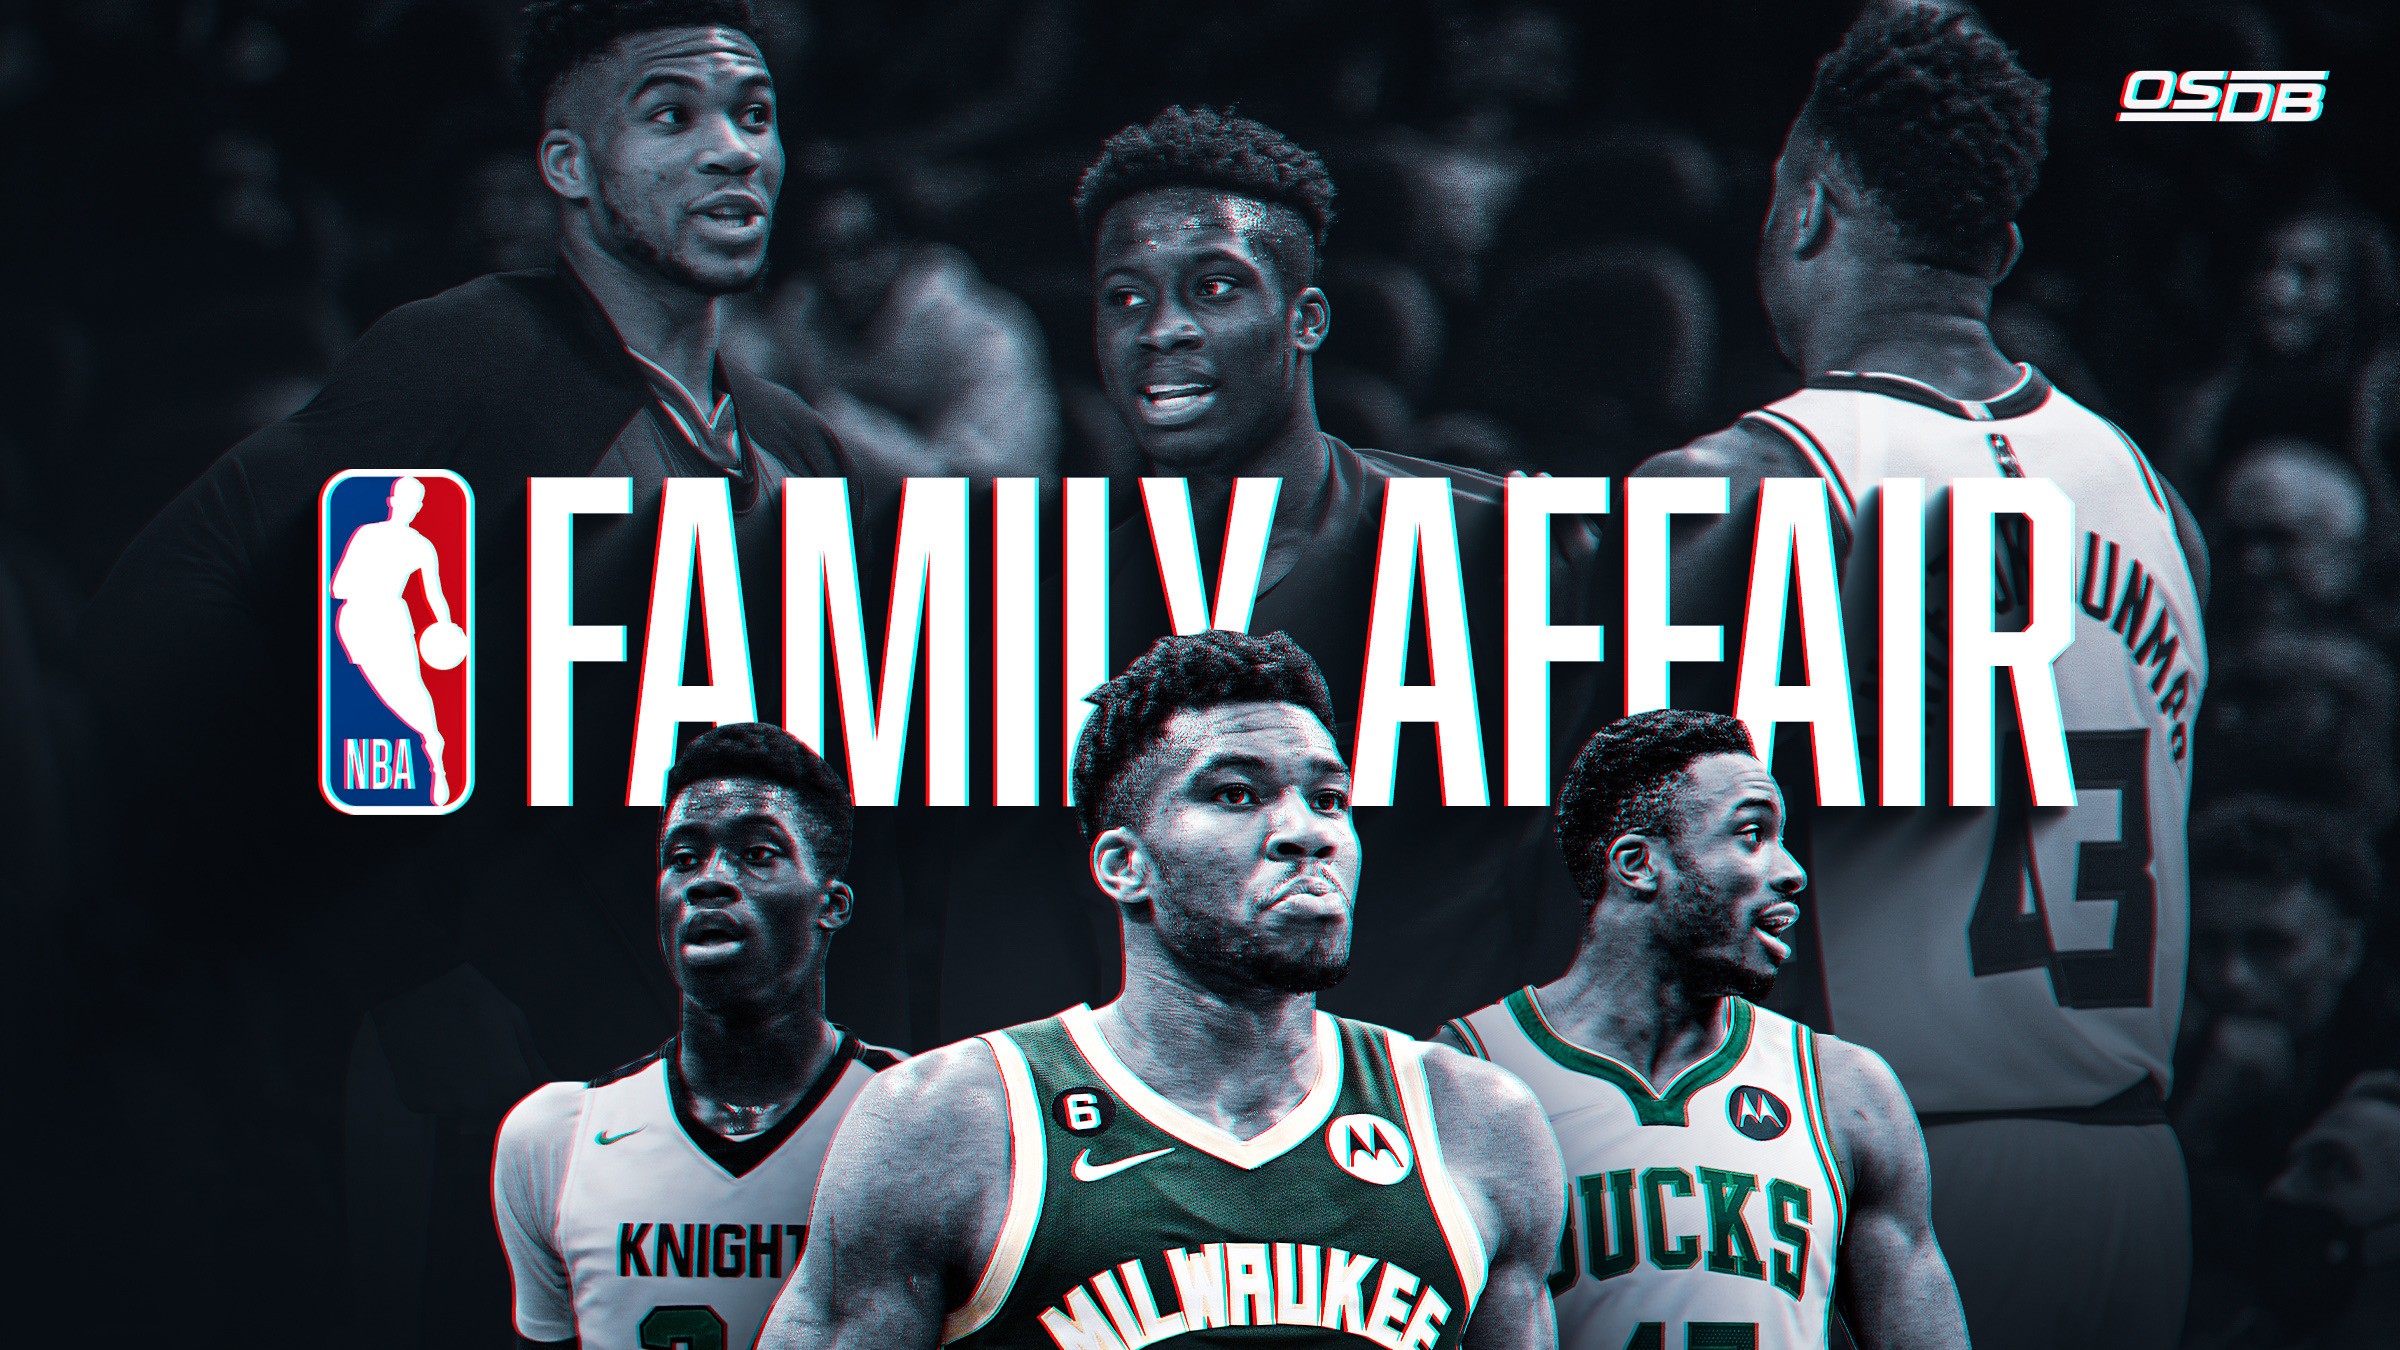 It's a Family Affair in the NBA